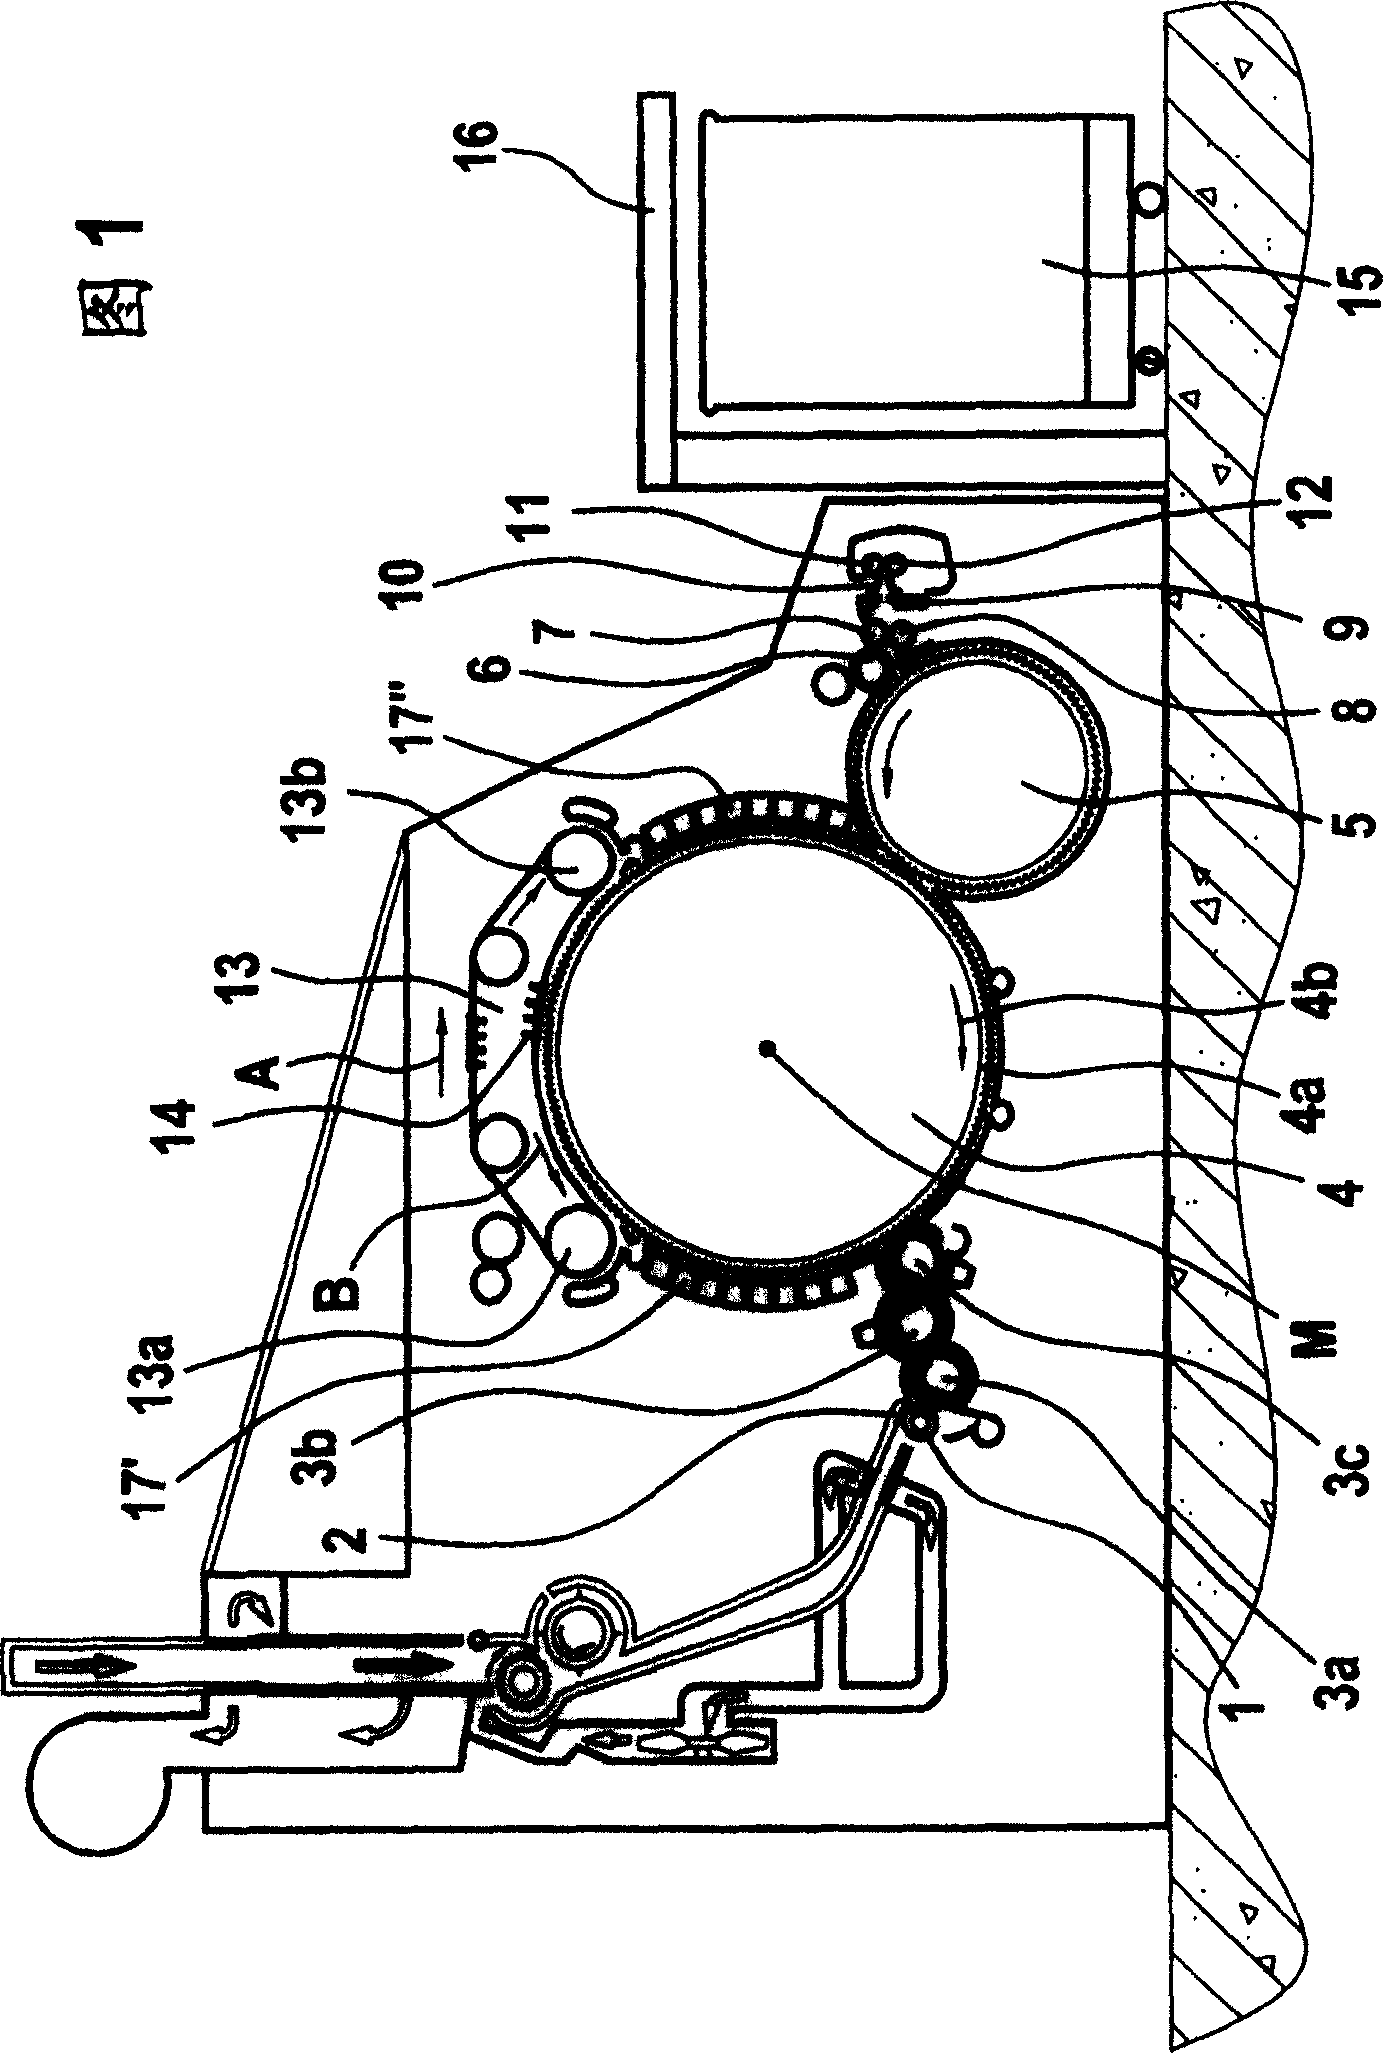 Apparatus on a carding machine for processing textile fibres, for example cotton, synthetic fibres and the like, with a cylinder